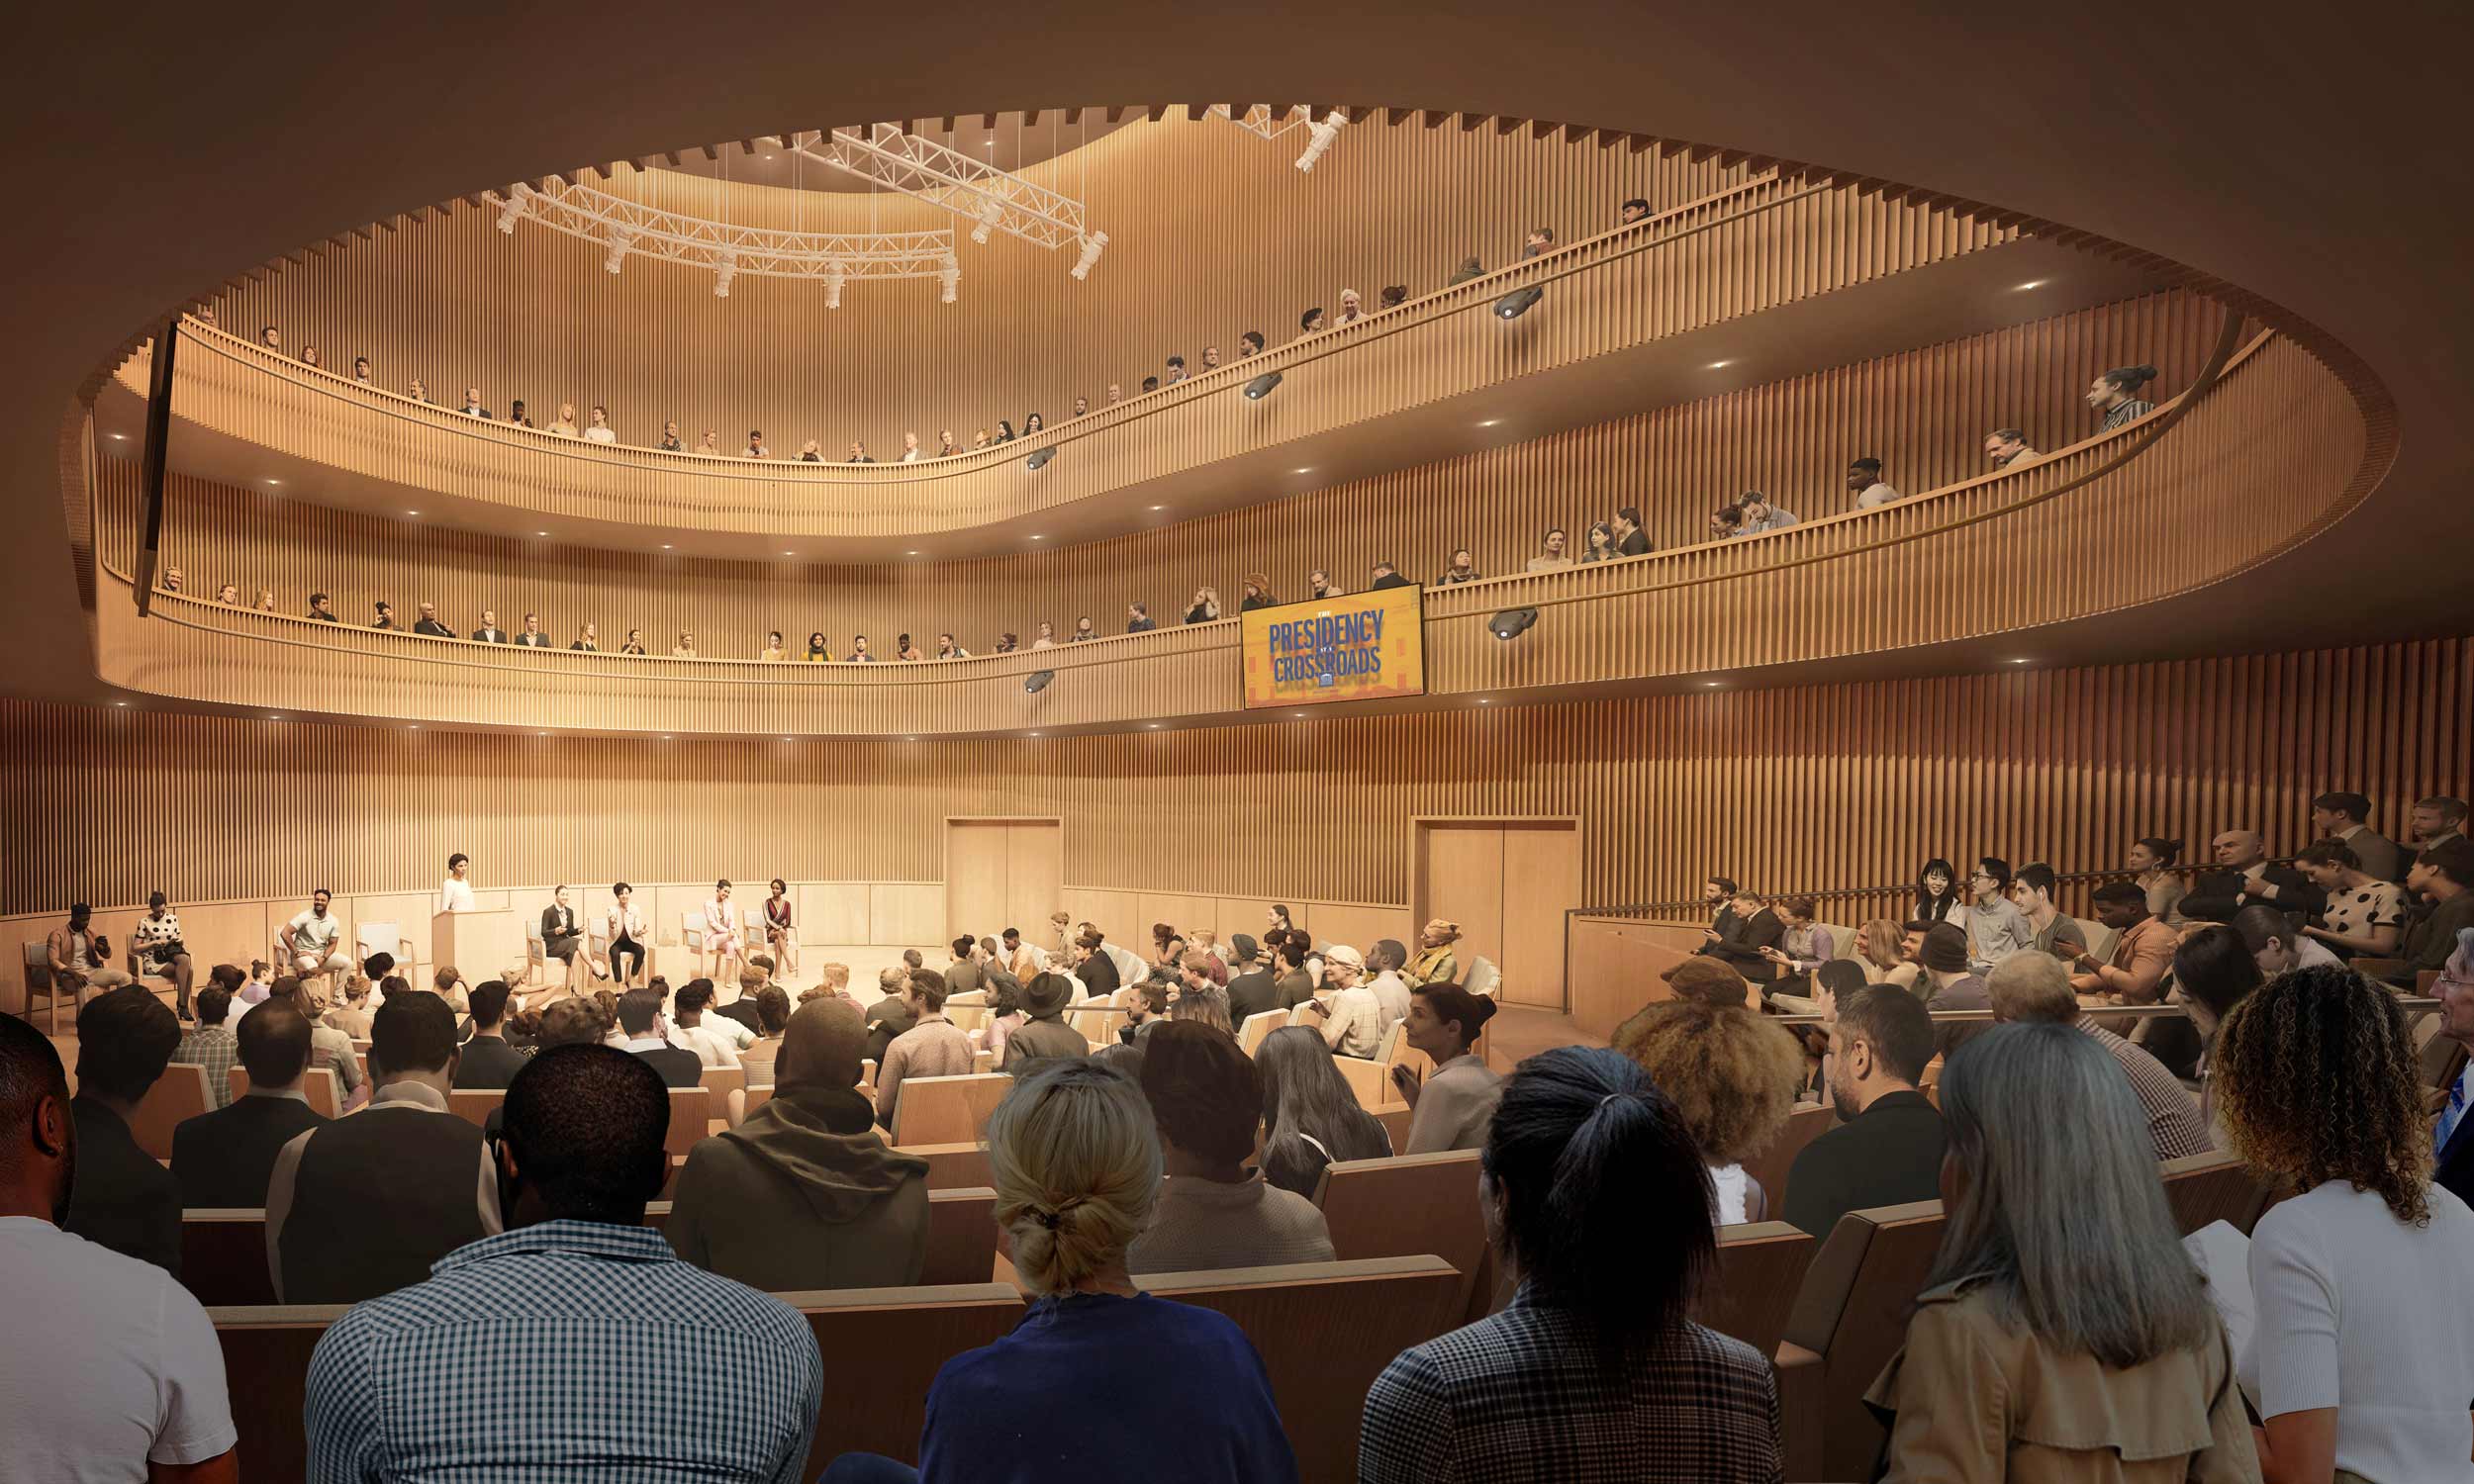 Inside view of the auditorium in the new Karsh building